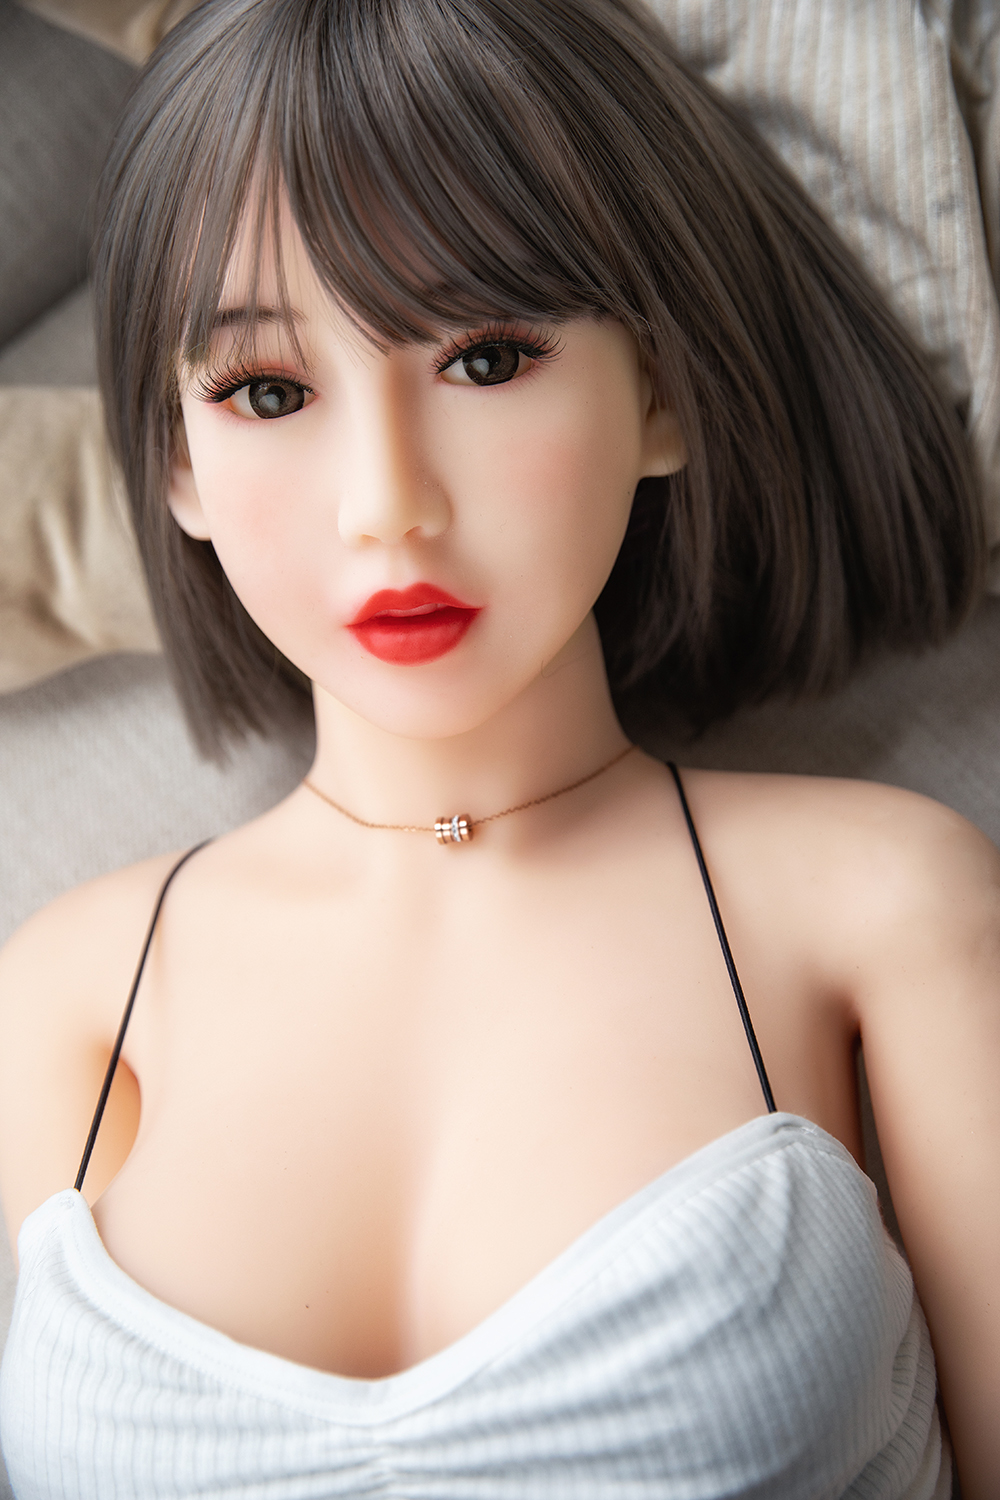 Jarliet 4ft 11 /150cm Lovely Small Breast Realistic Sex Doll - Aoi-SexDollBabe